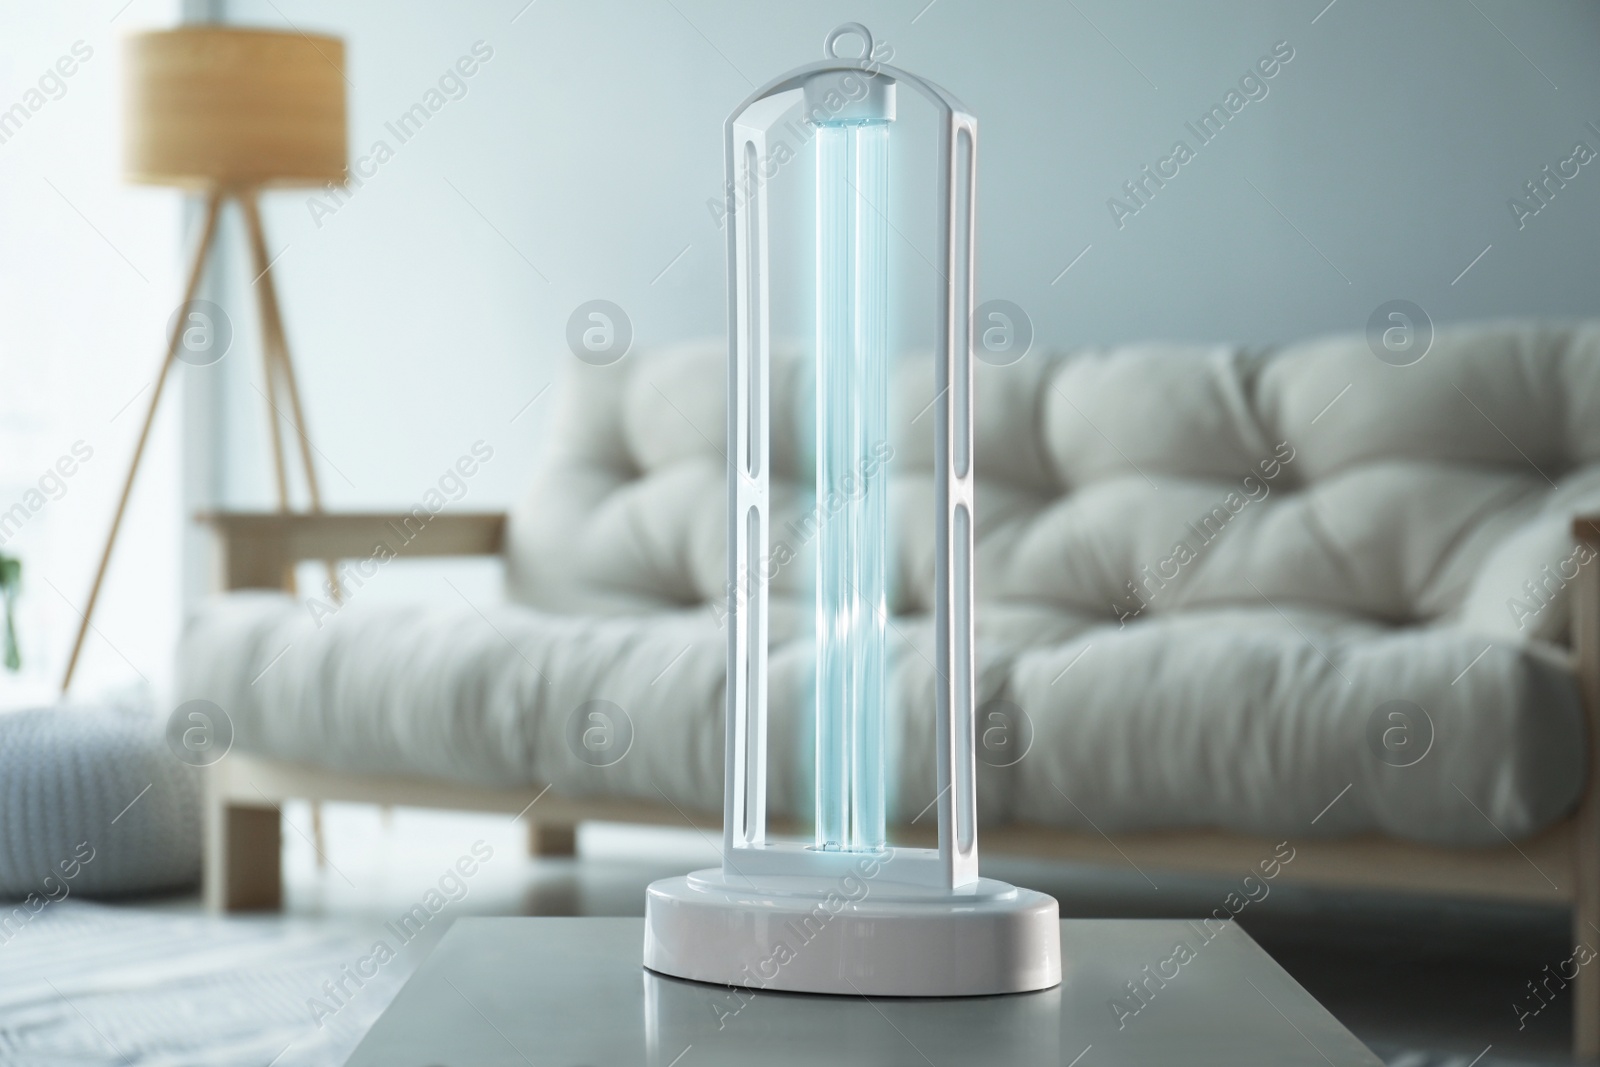 Photo of UV sterilizer lamp on table at home